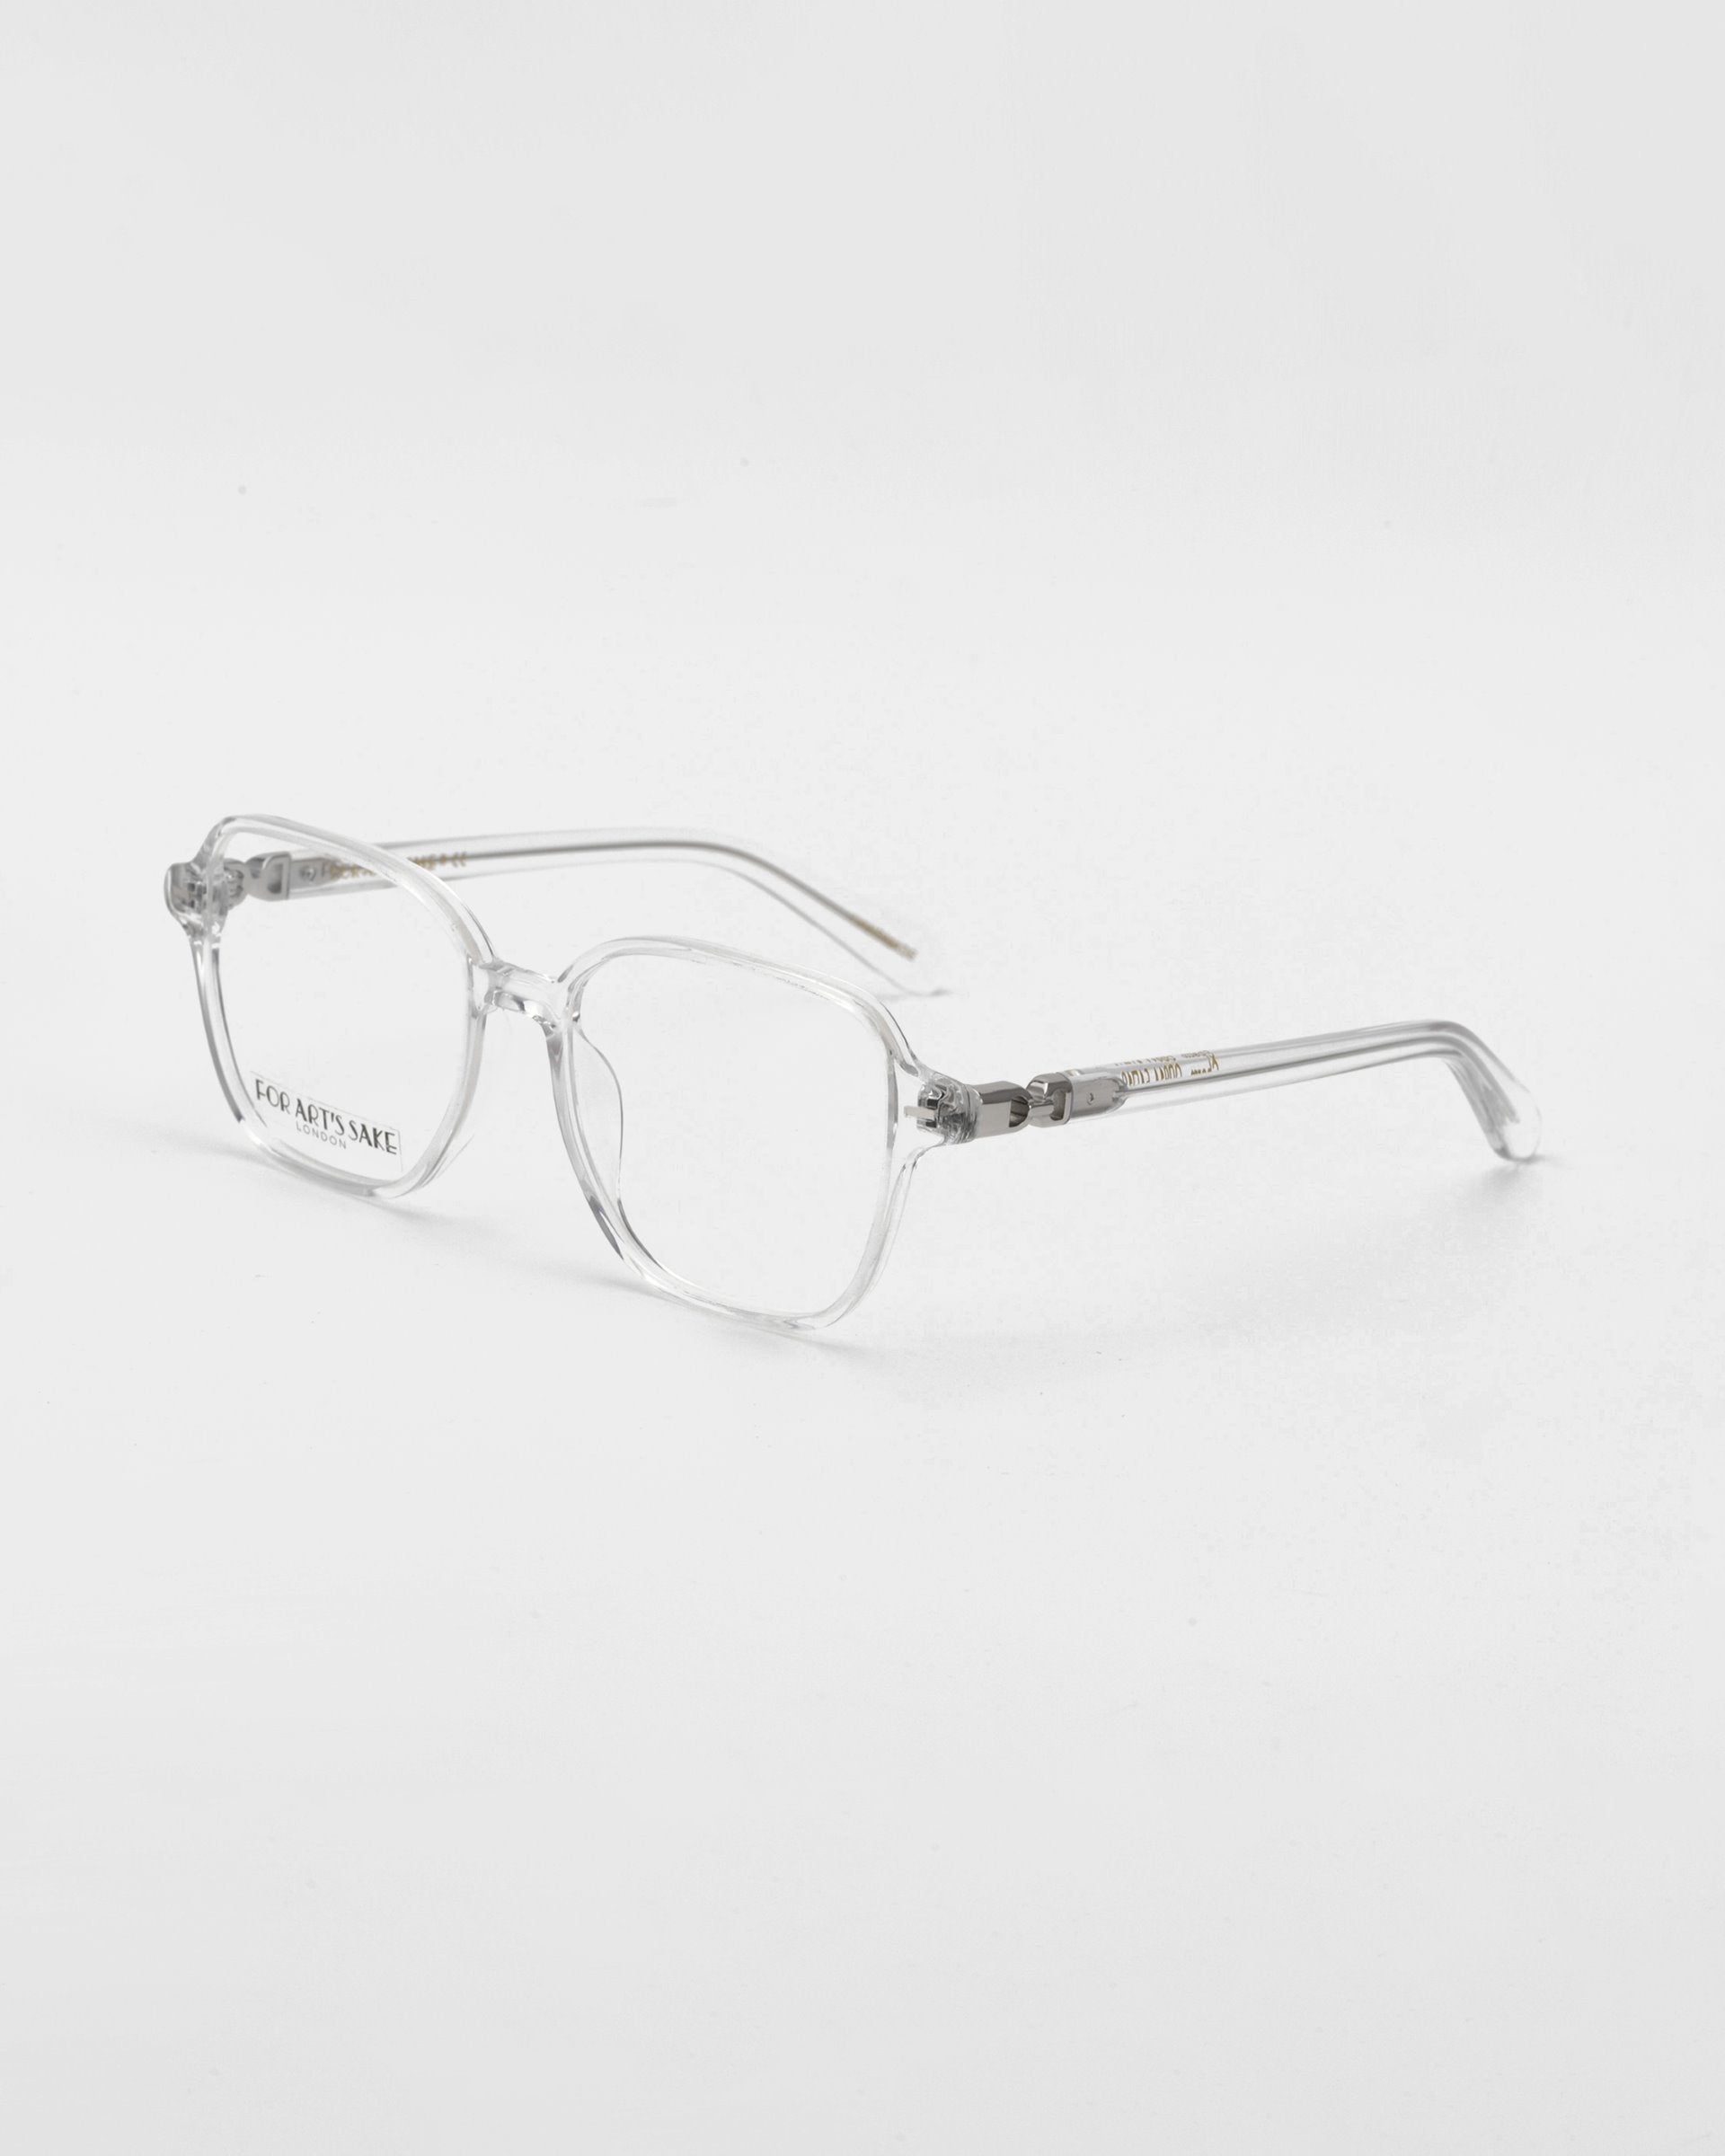 A pair of For Art's Sake® Charm transparent framed optical glasses in a cat-eye shape against a white background.